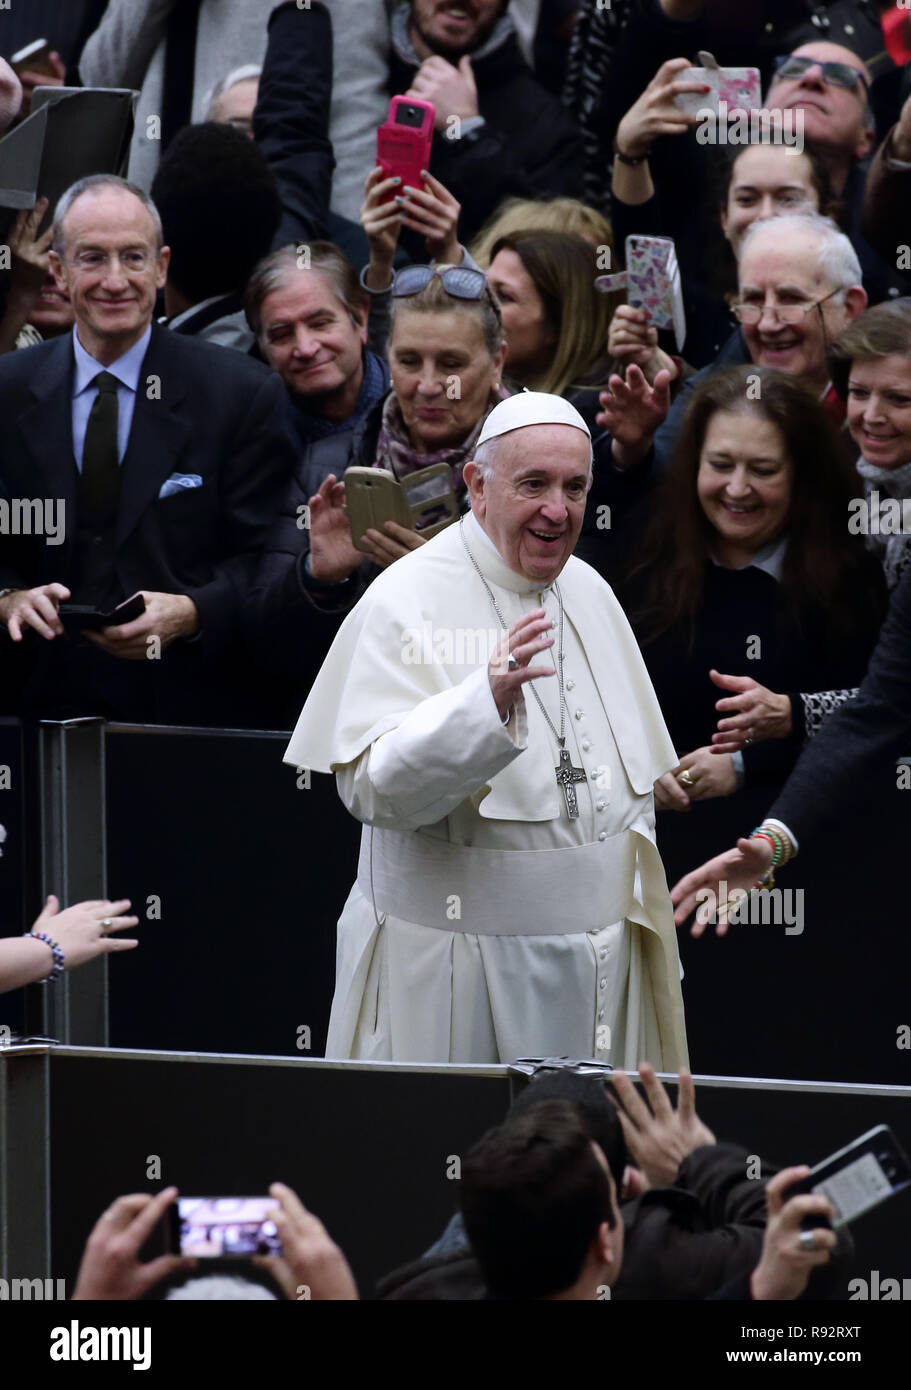 December 19, 2018 - Vatican City (Holy See) - POPE FRANCIS during his weekly Wednesday audience in Aula Paolo VI at the Vatican. Credit: Evandro Inetti/ZUMA Wire/Alamy Live News Stock Photo